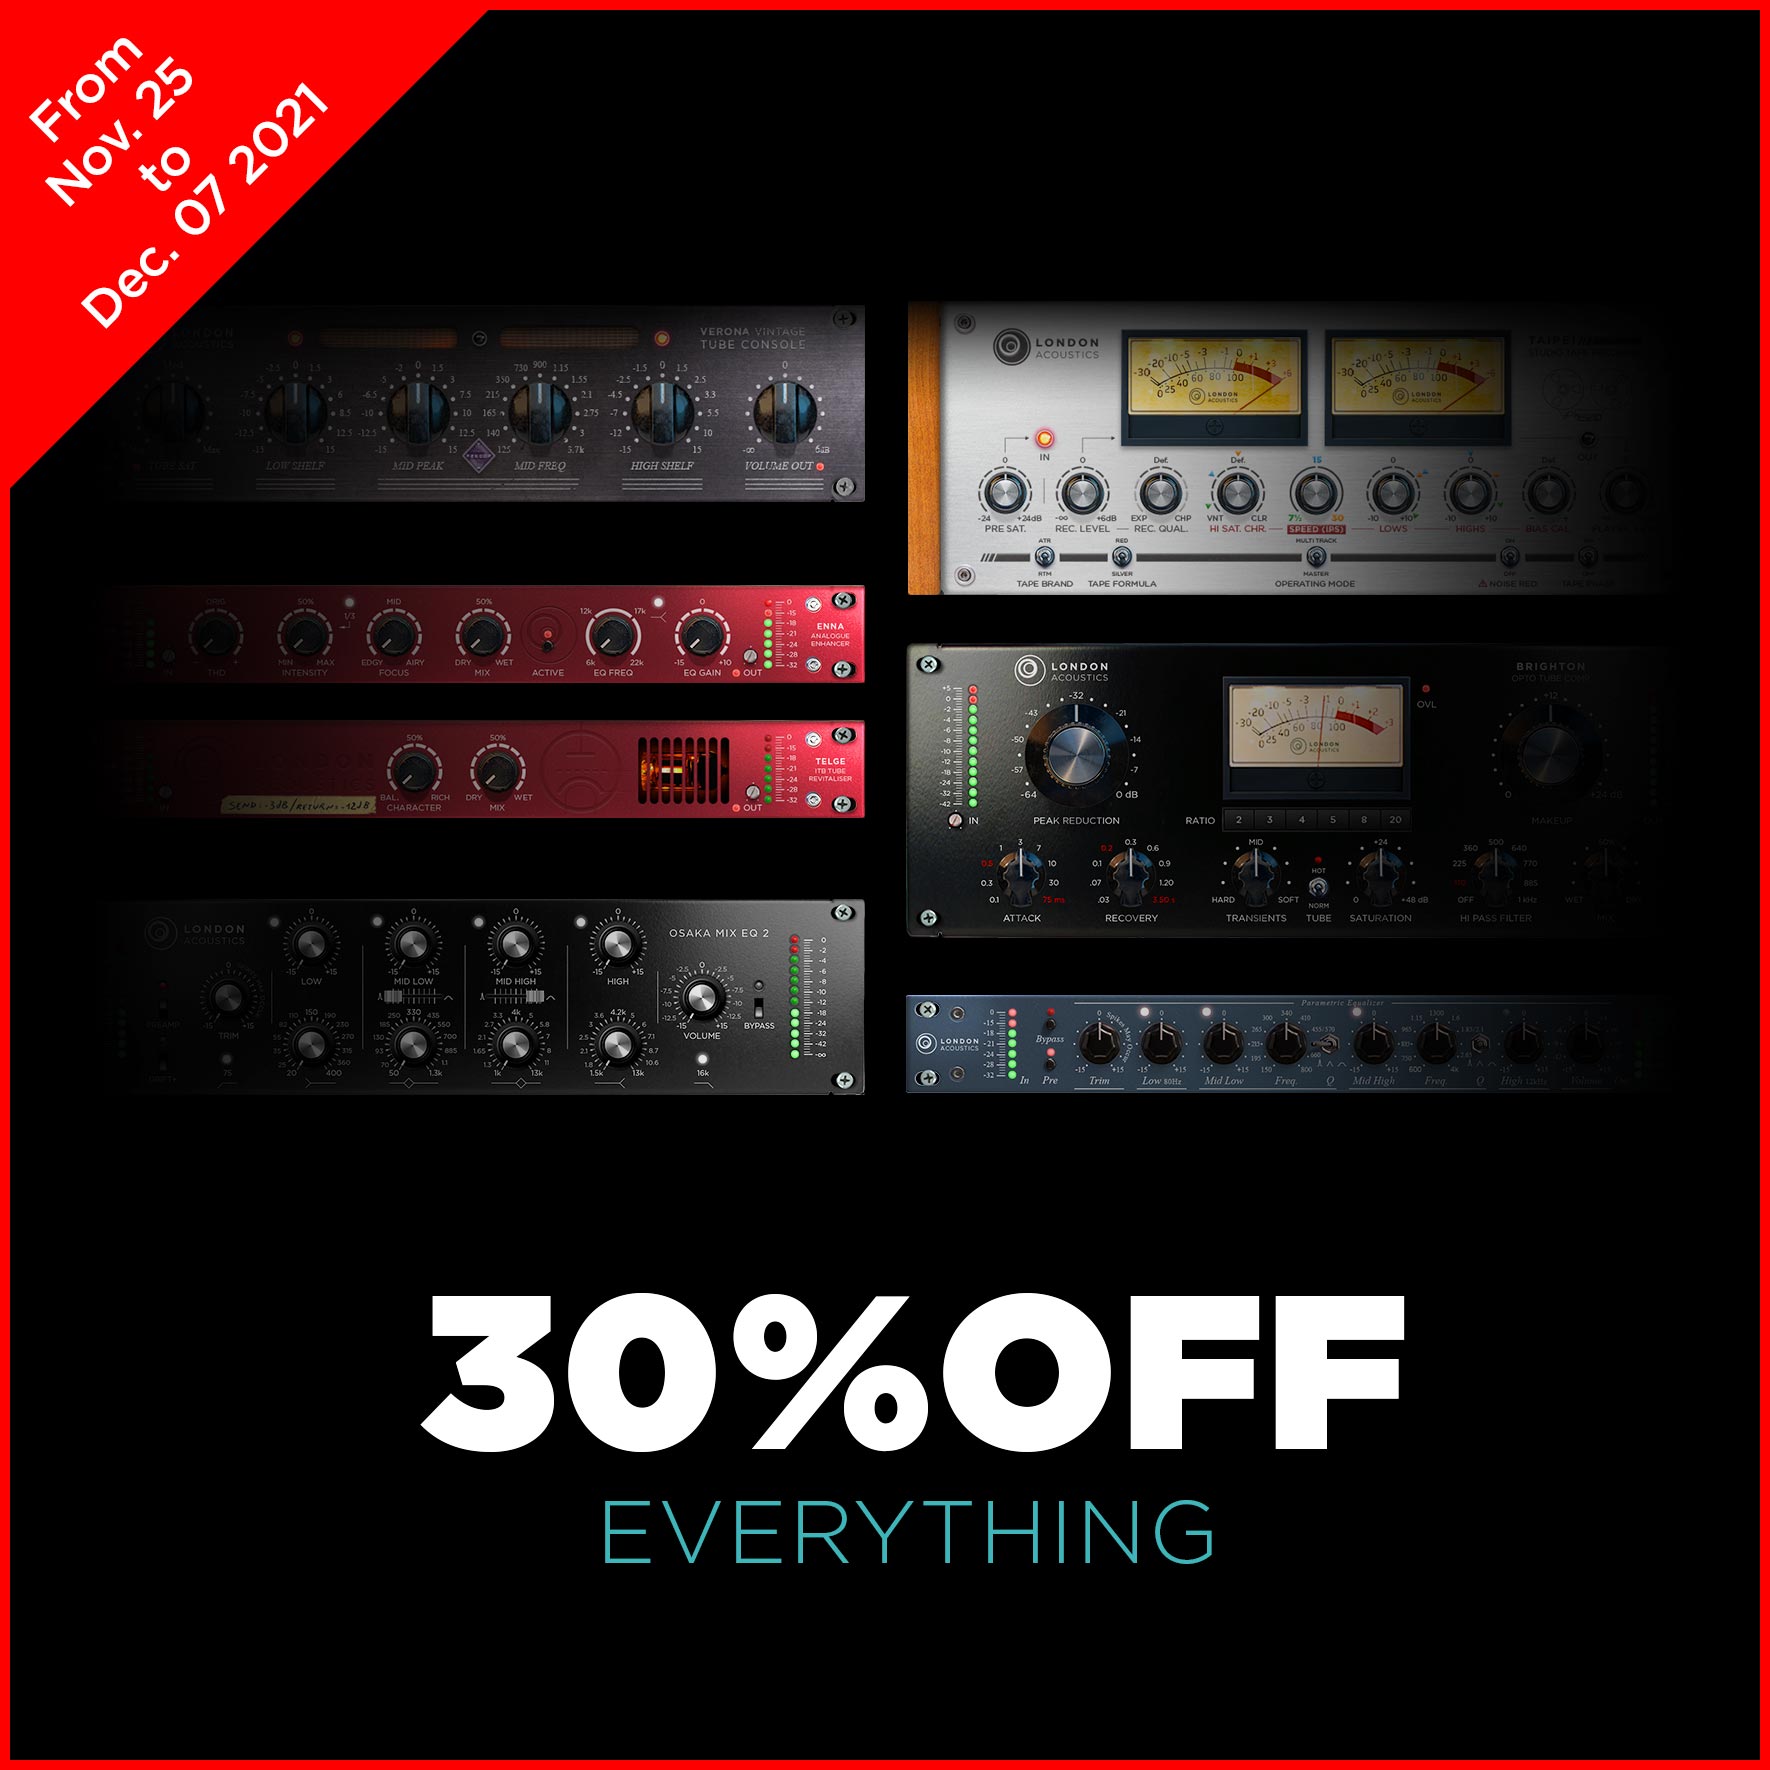 London Acoustics Sale Black Friday 2021 with 30% off everything